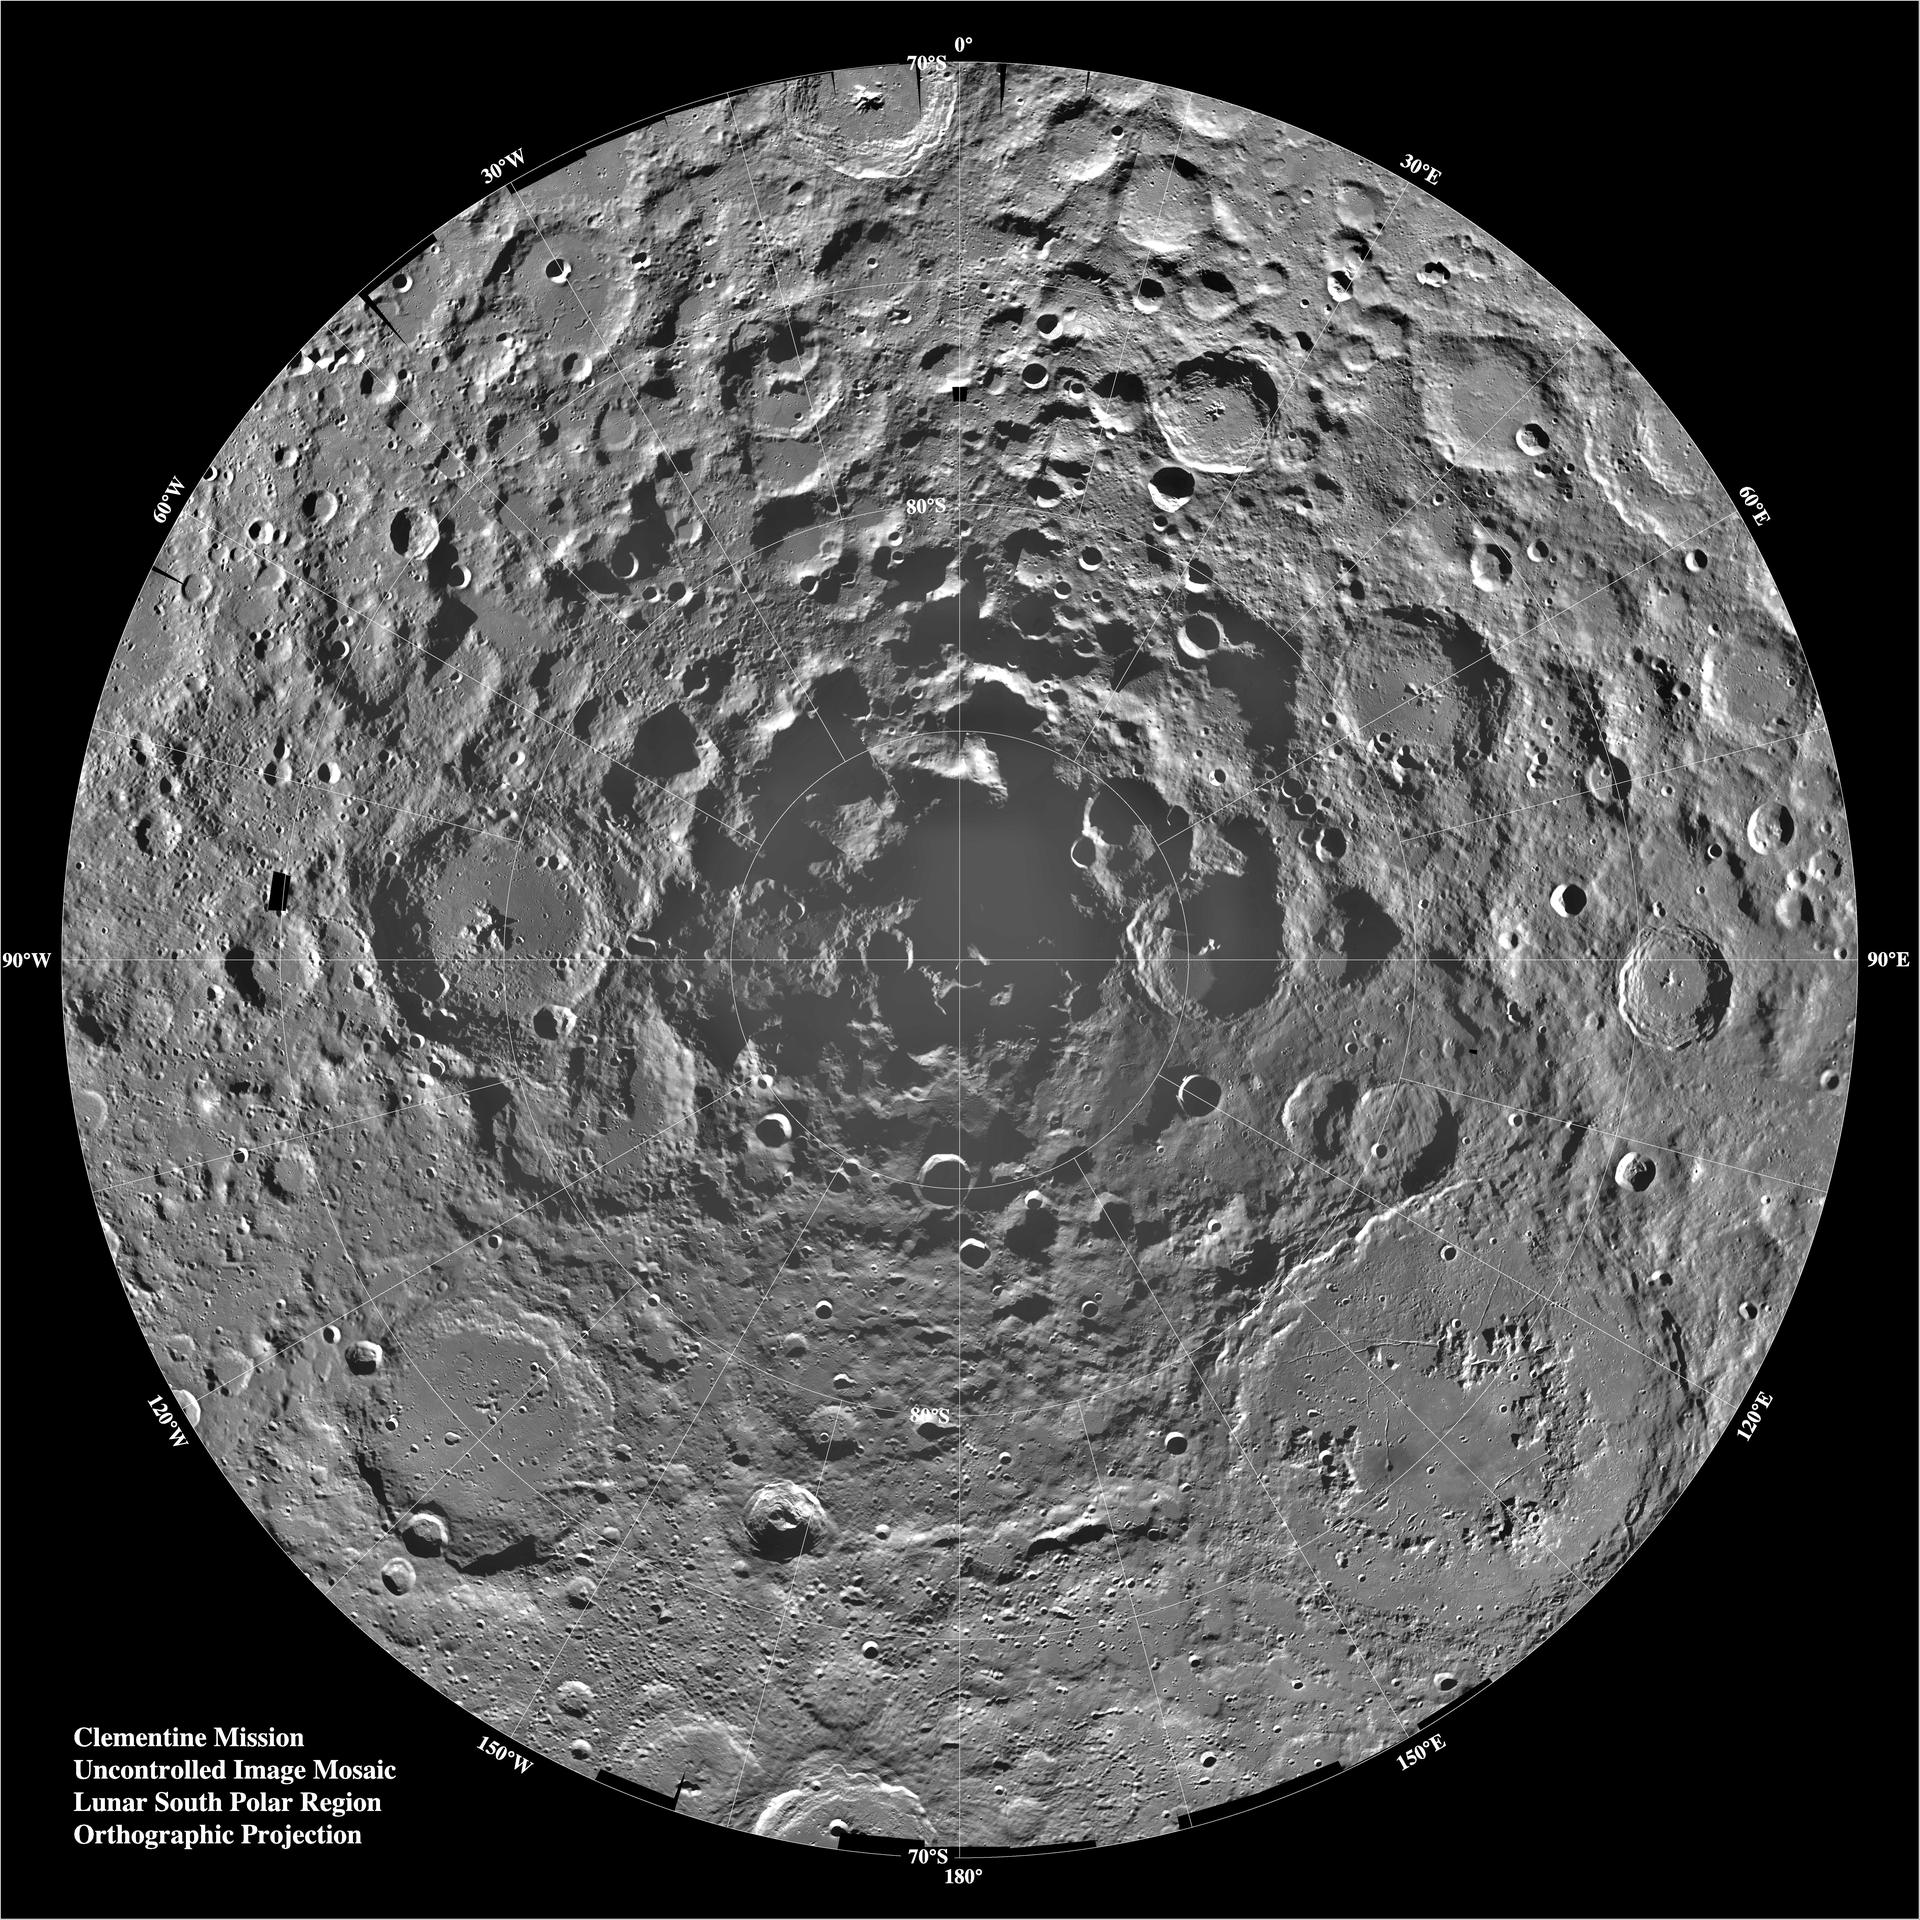 View of the lunar South Pole. In the center of the image, the Moon's slate grey surface is visible. Dotted with craters the visual is one that is uncommon and from a unique angle. The background of the image is a dark black of space. Radial guidelines permeate from the center of the Moon showing directional degrees from the South Pole. The bottom left of the image states "Clementine Mission. Uncontrolled Image Mosaic. Lunar South Polar Region. Orthographic Projection."